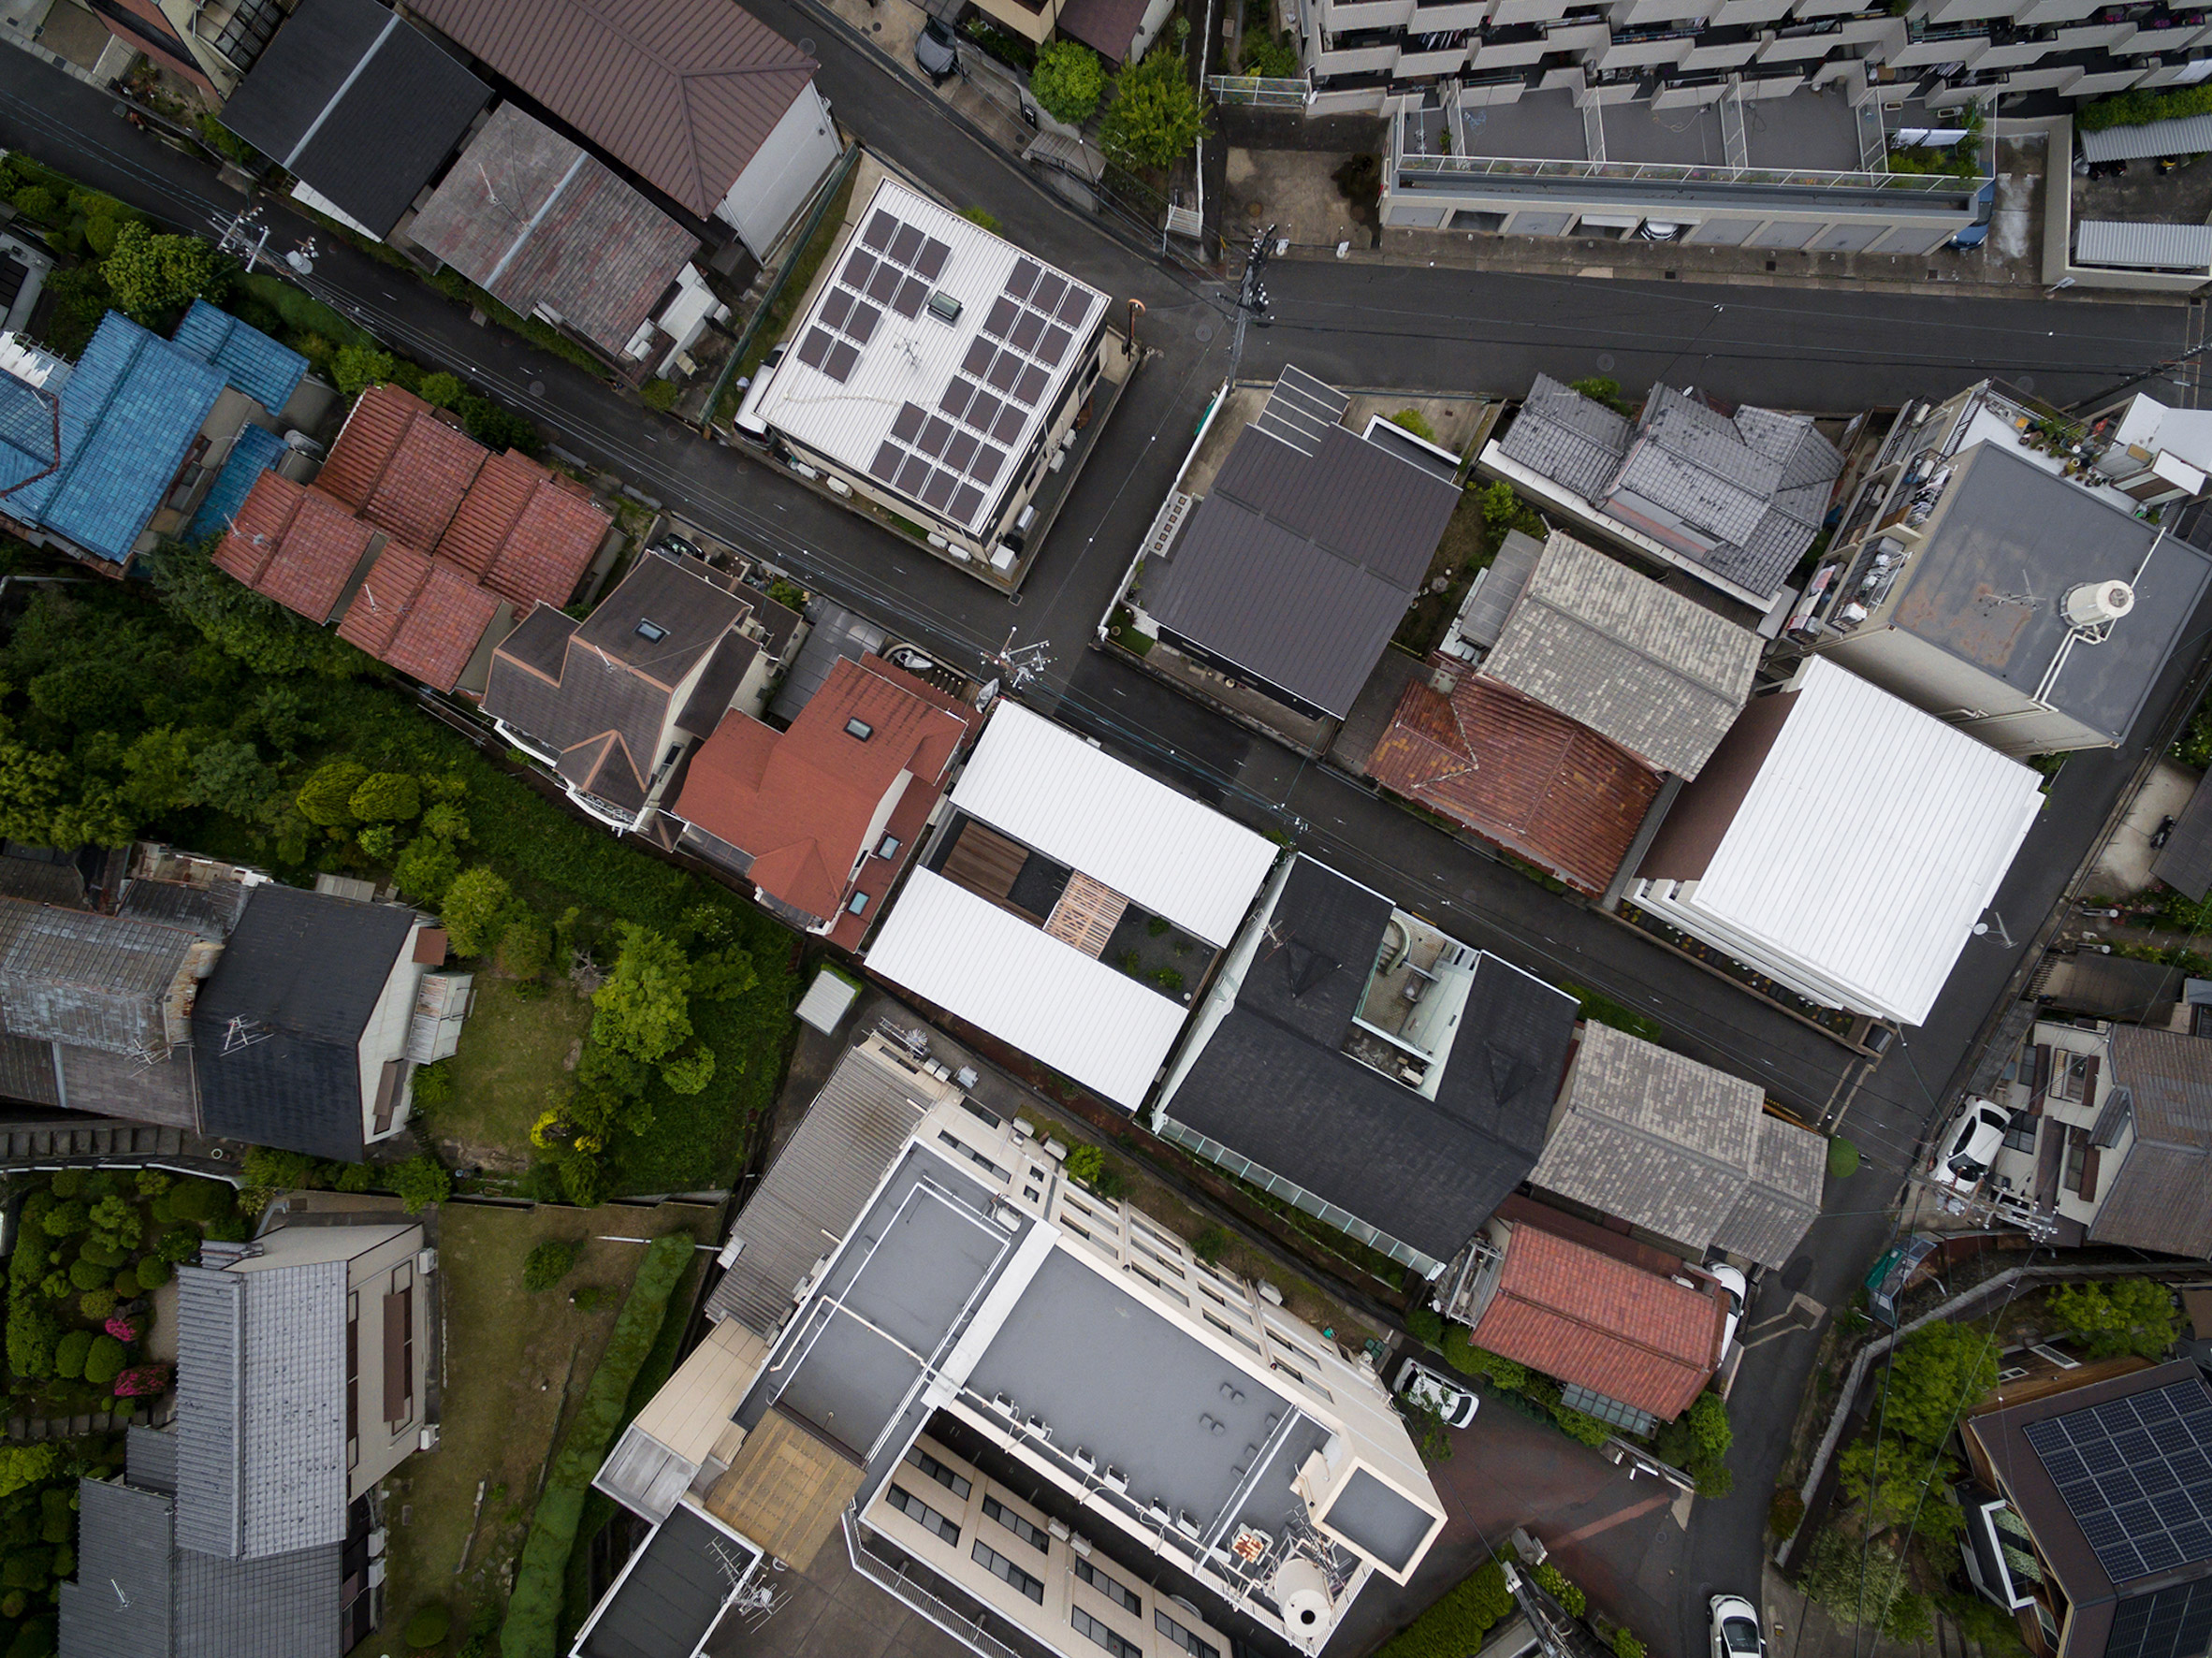 Aerial view of houses in Nara City